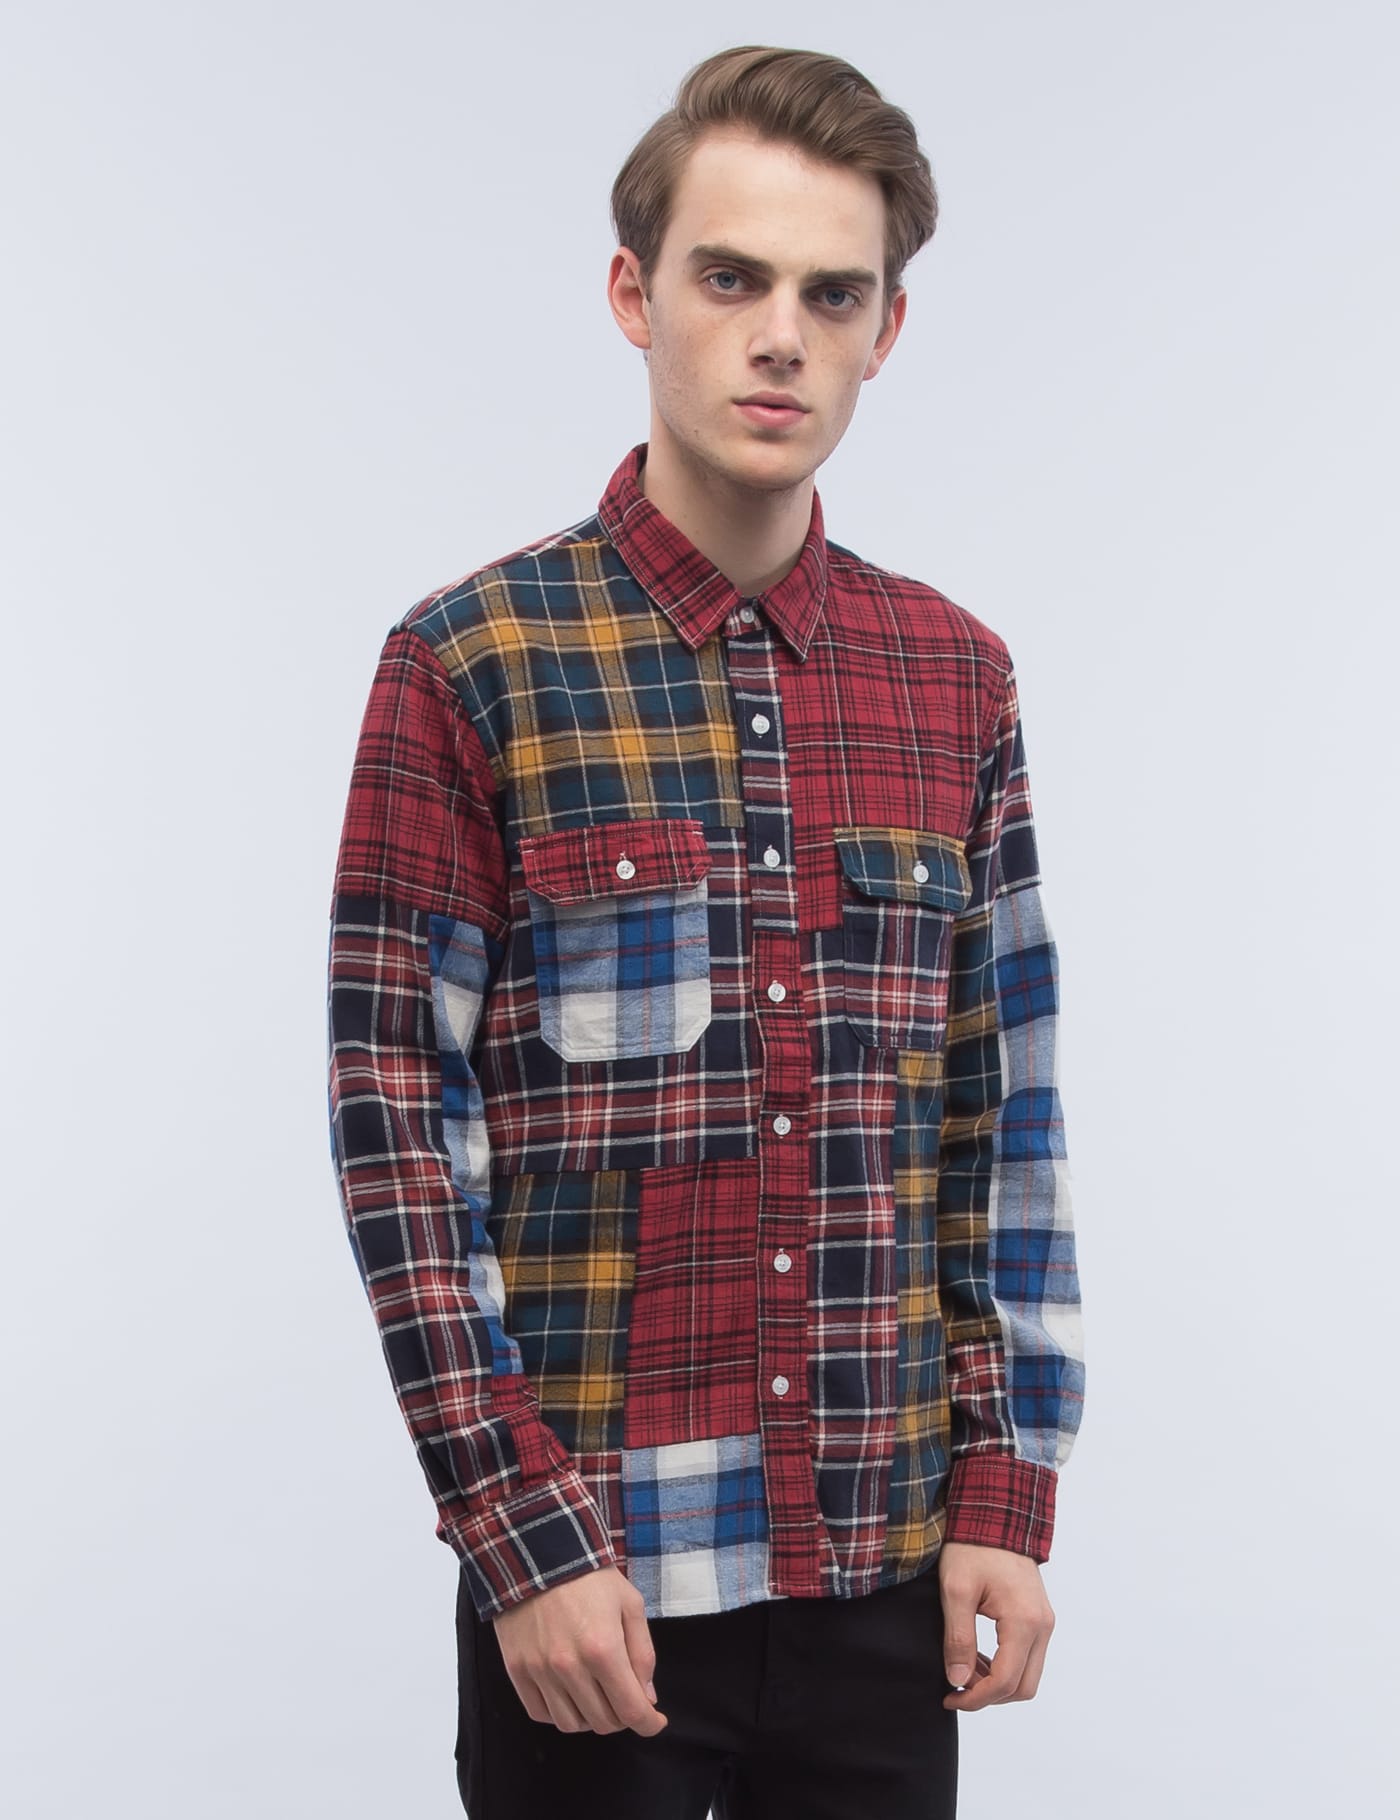 Stüssy - Mixed Plaid Shirt | HBX - Globally Curated Fashion and 